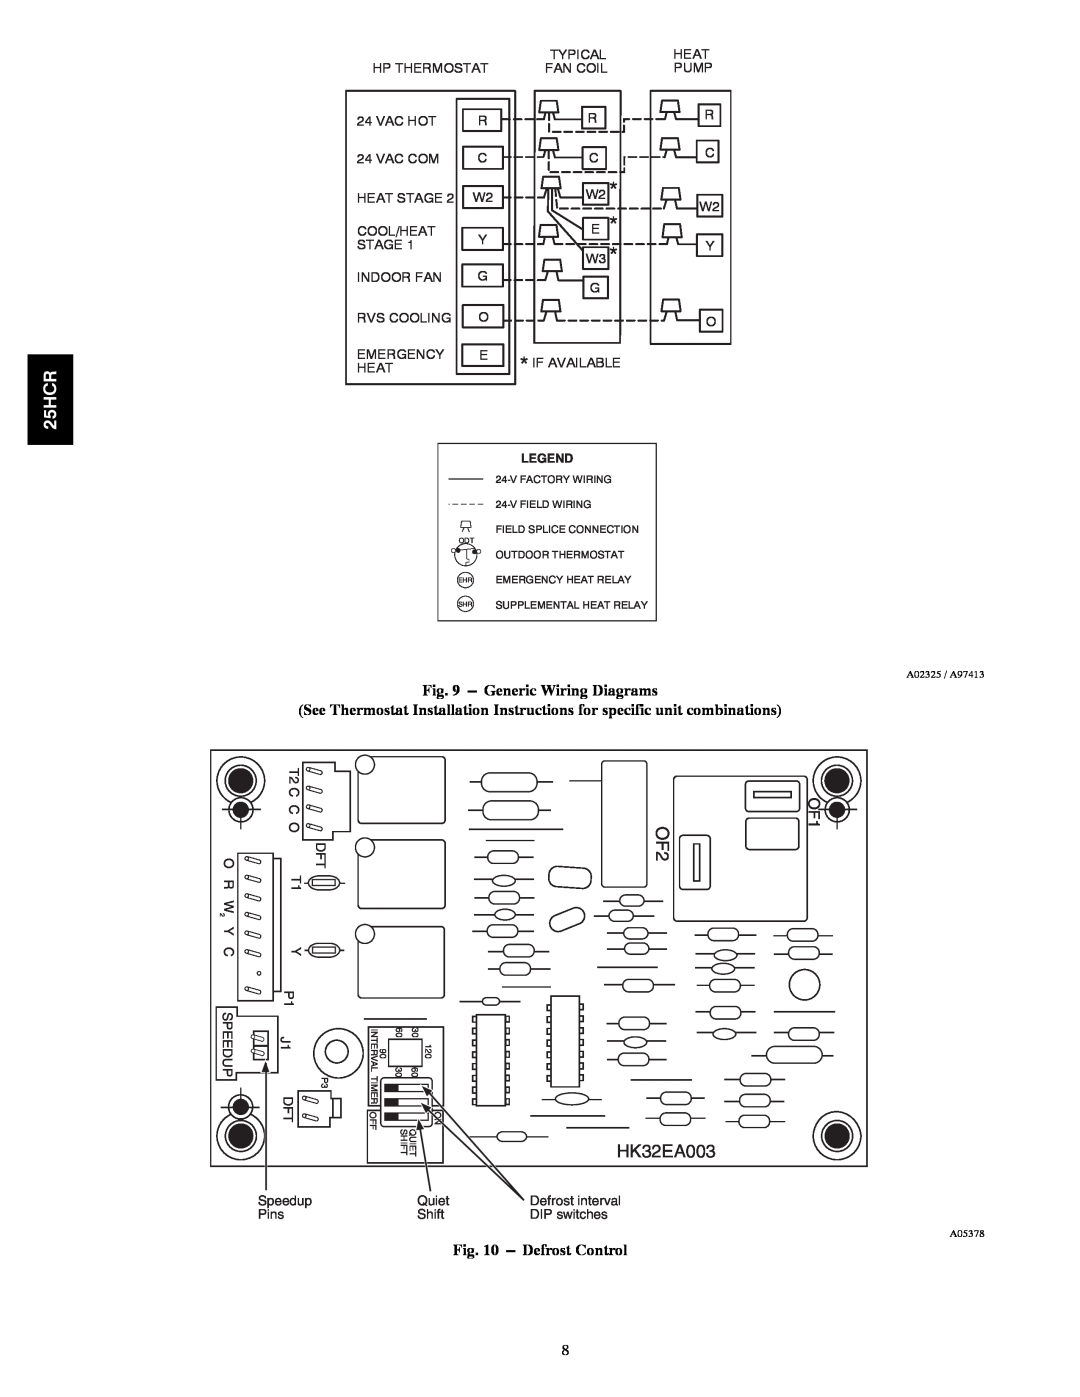 Carrier 25HCR installation instructions Generic Wiring Diagrams, Defrost Control, OF2 HK32EA003 